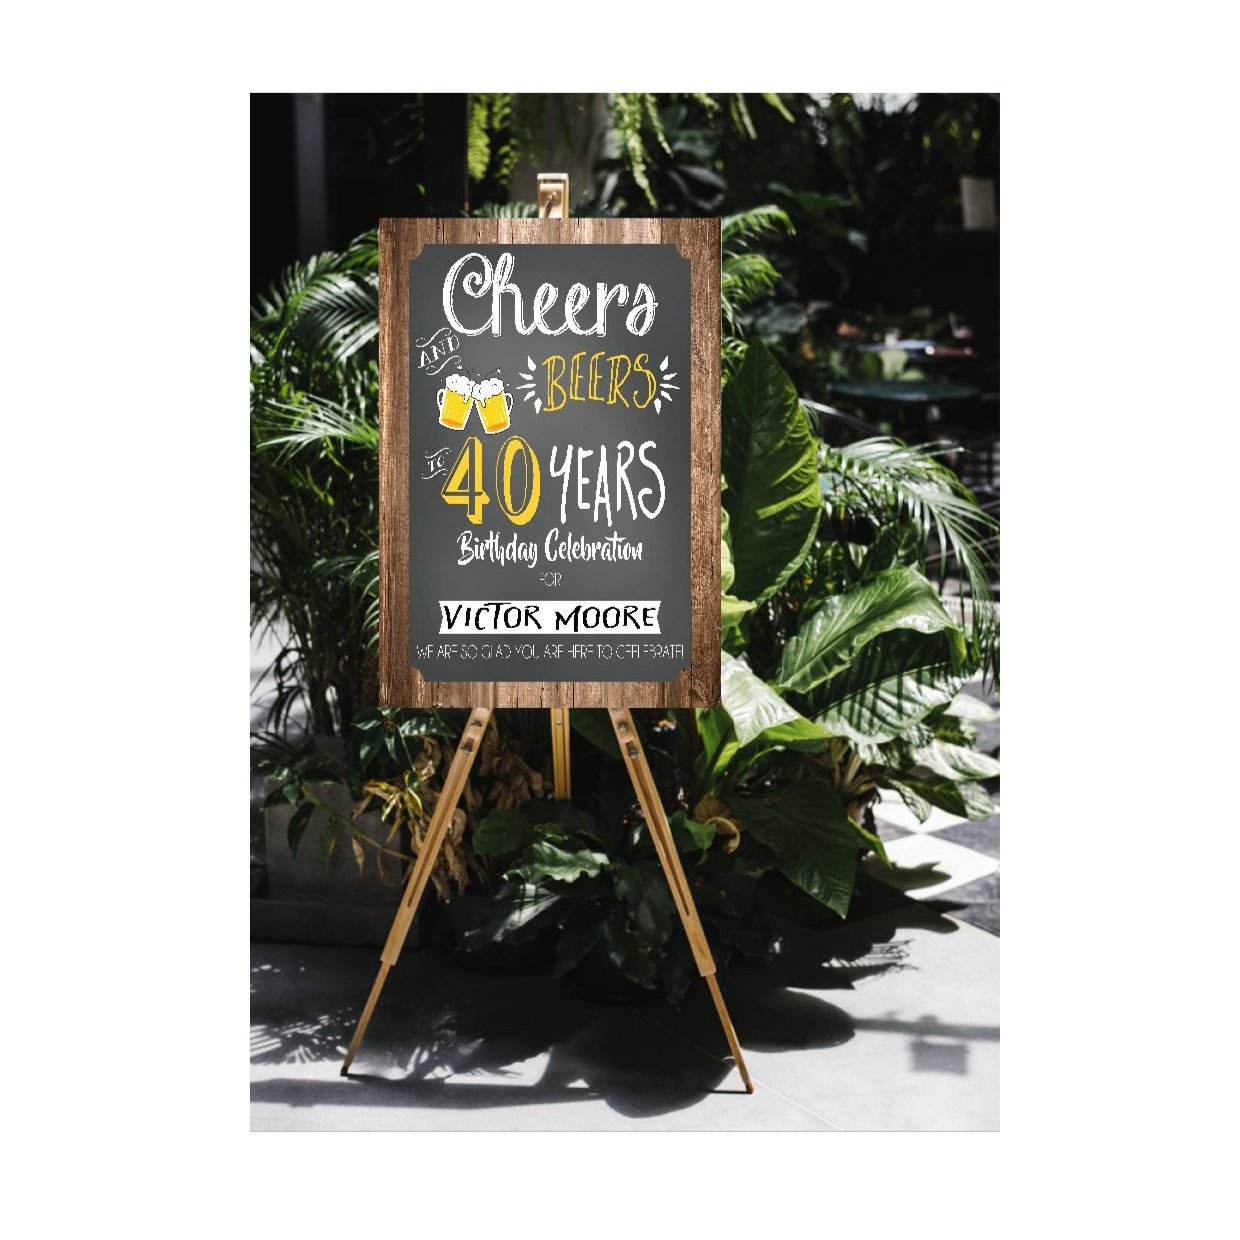 Cheers and beers personalized signage